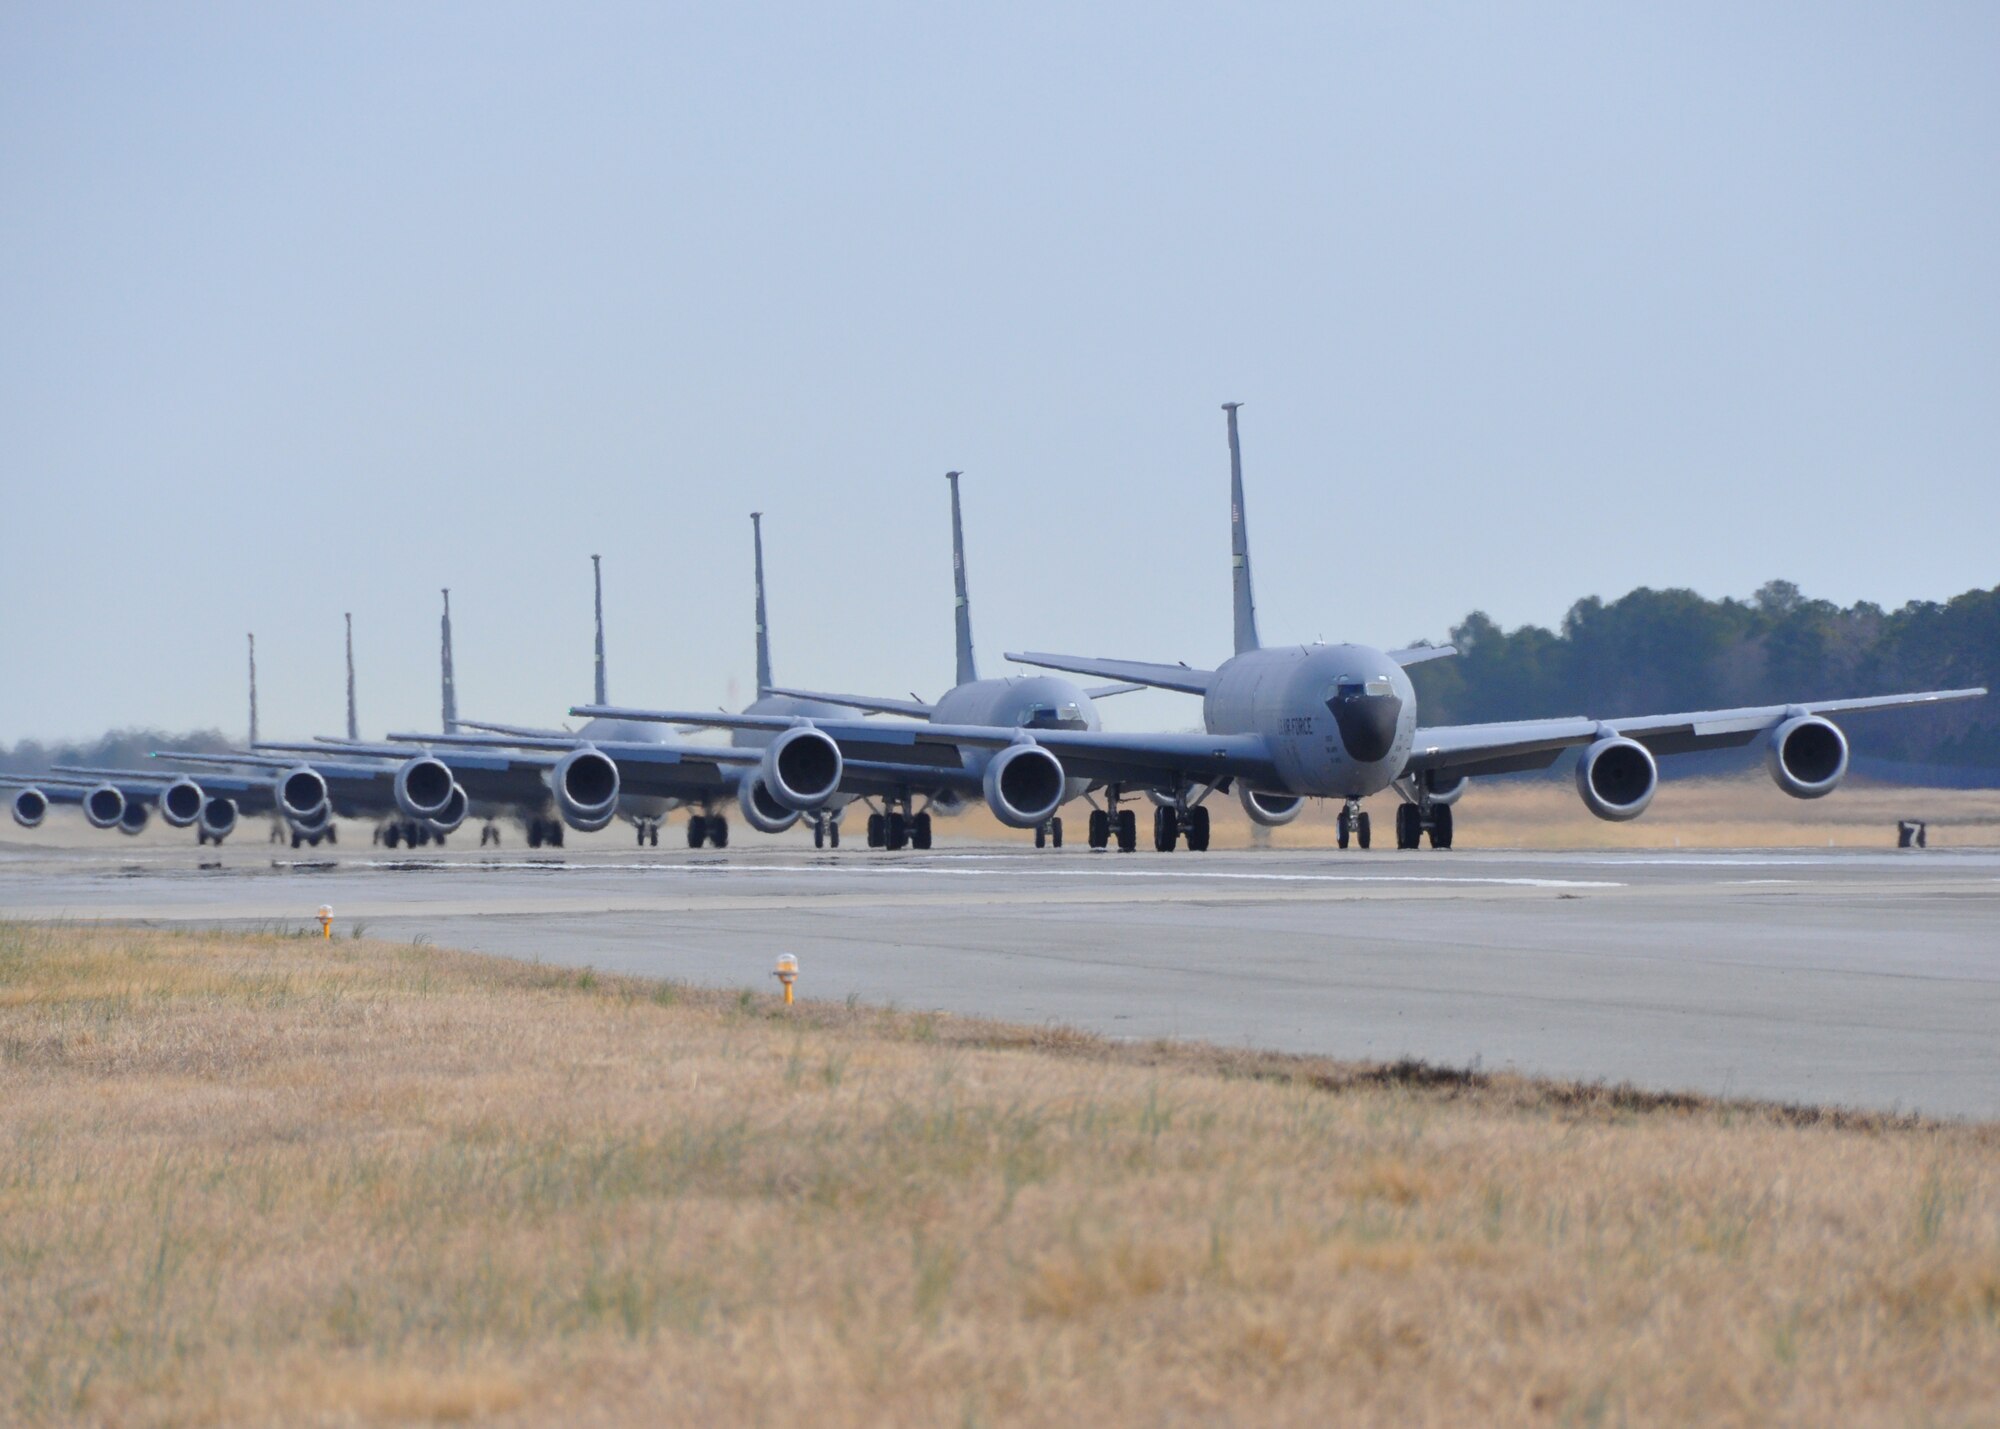 Seven KC-135R Stratotankers from the 916th Air Refueling Wing, Air Force Reserve, line the ramp at Seymour Johnson Air Force Base on Jan. 8 ,2012. (USAF photo by MSgt. Wendy Lopedote, 916ARW/PA)